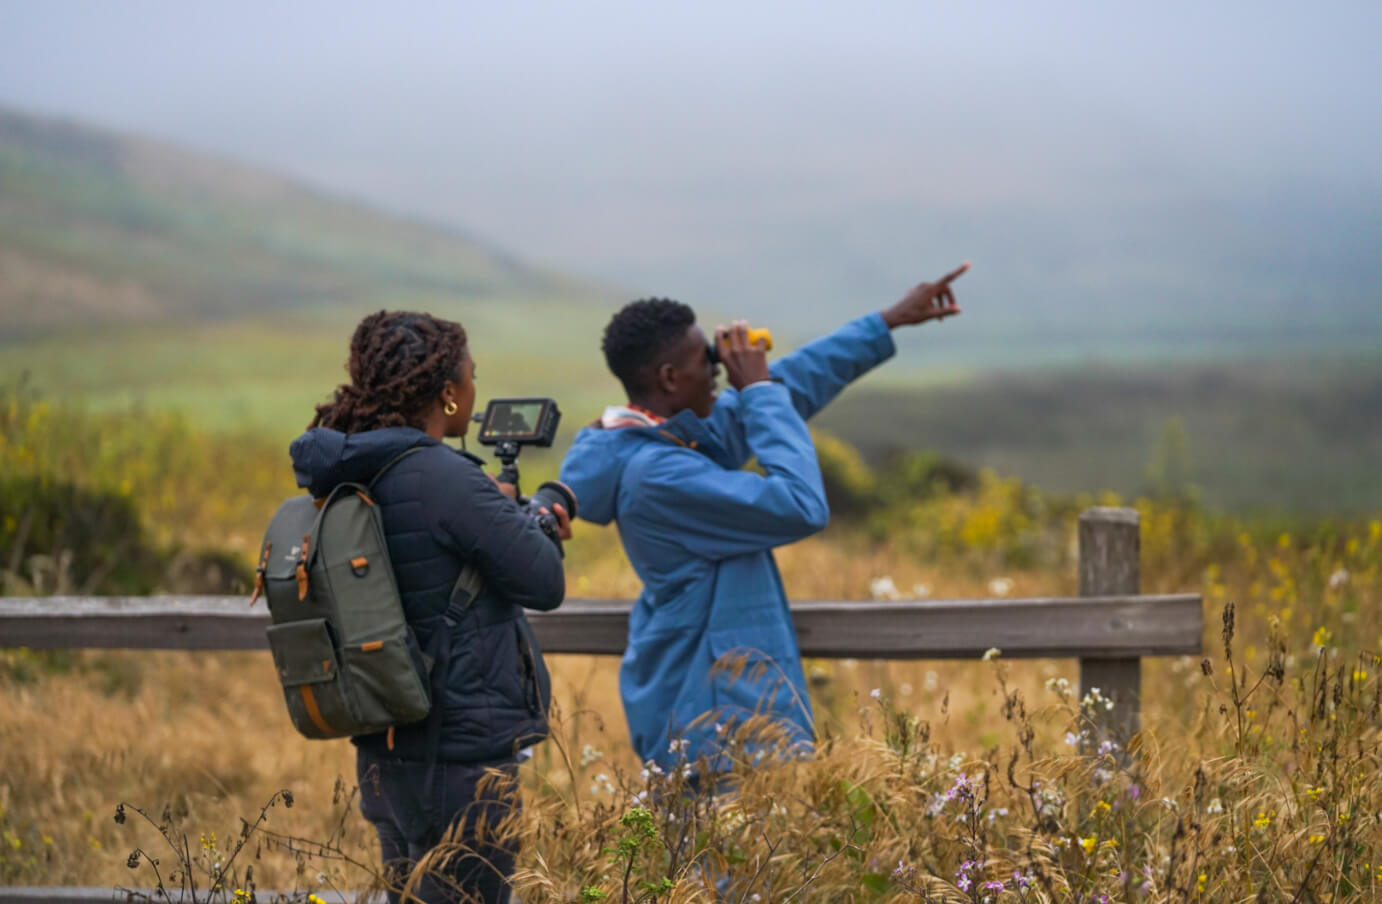 A picture of Isaiah Scott and a friend on a hiking trail, looking through a pair of Nocs and pointing out something in the distance